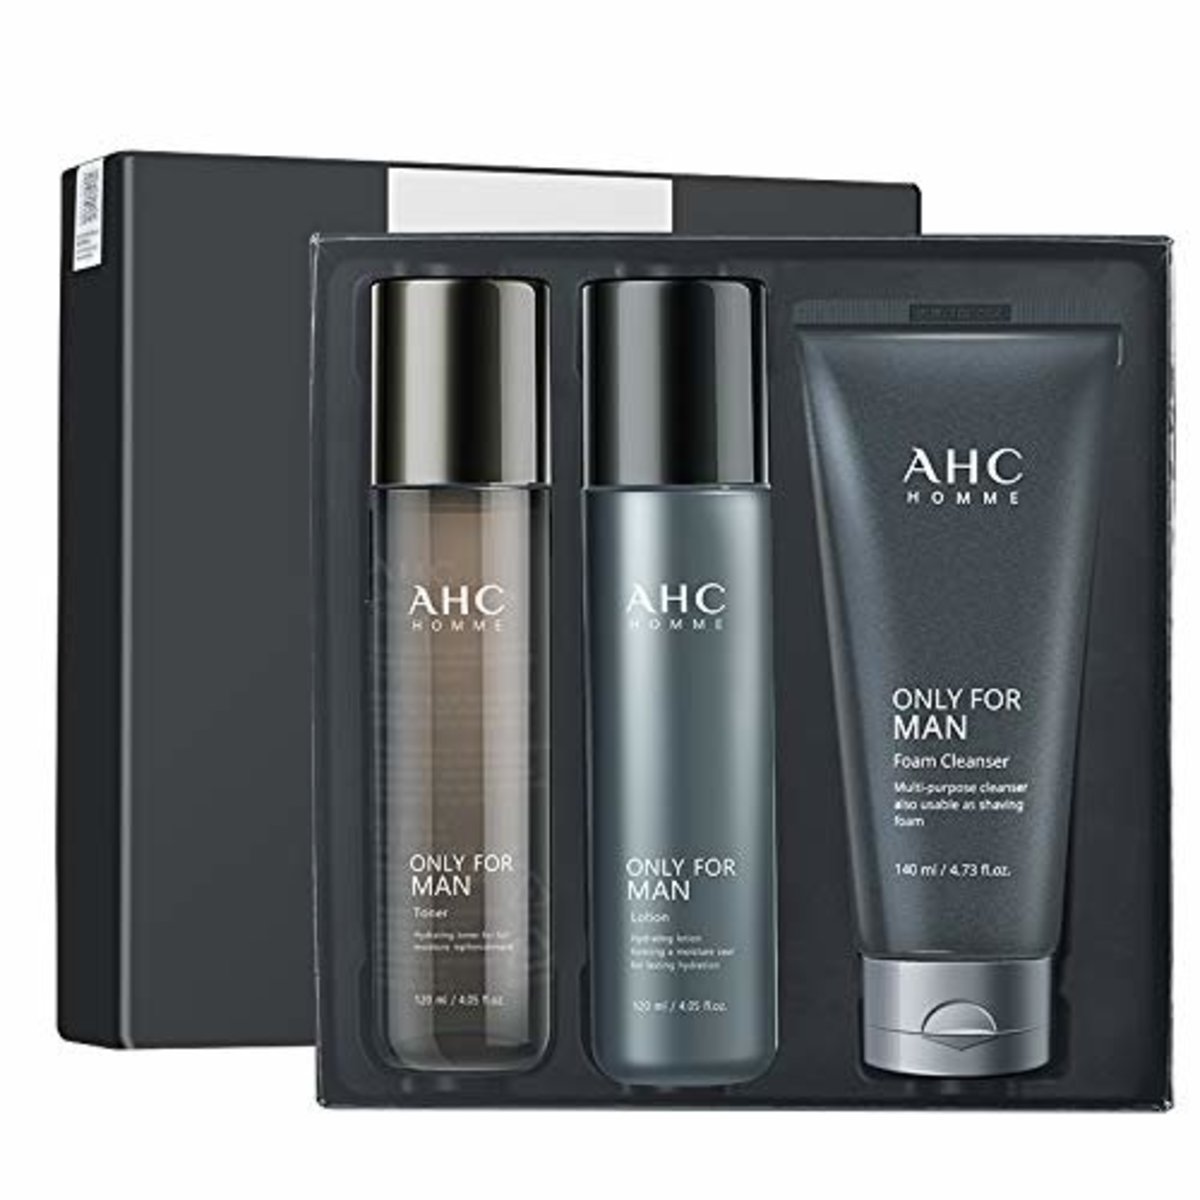 AHC Homme Only For Man Skin Care Set